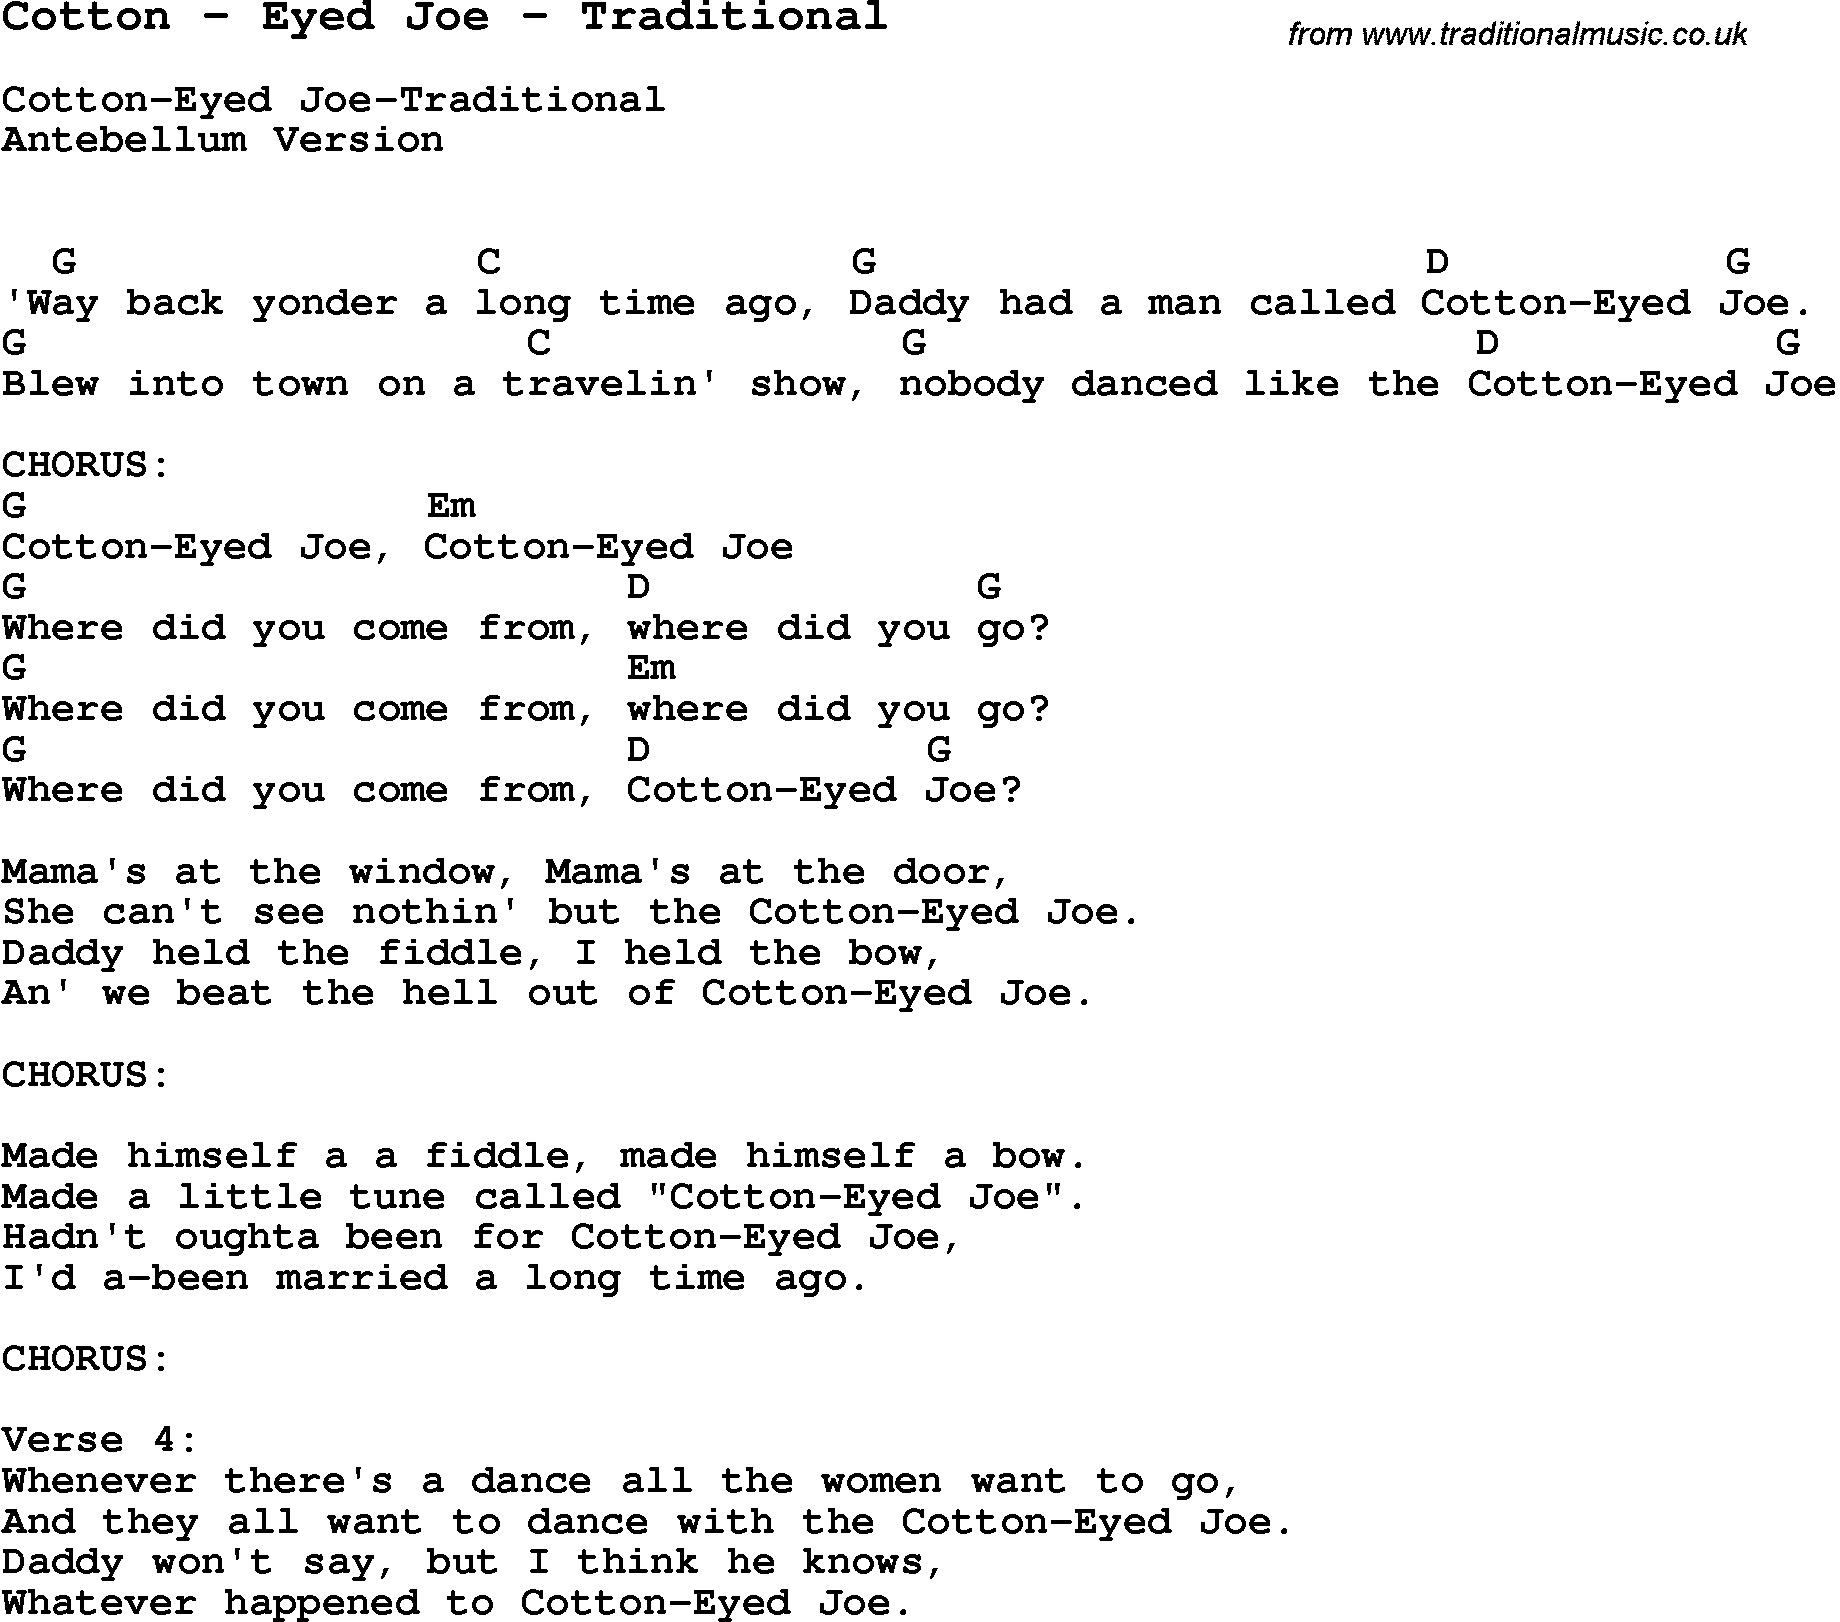 Song Cotton by Eyed Joe by Traditional, with lyrics for vocal performance and accompaniment chords for Ukulele, Guitar Banjo etc.